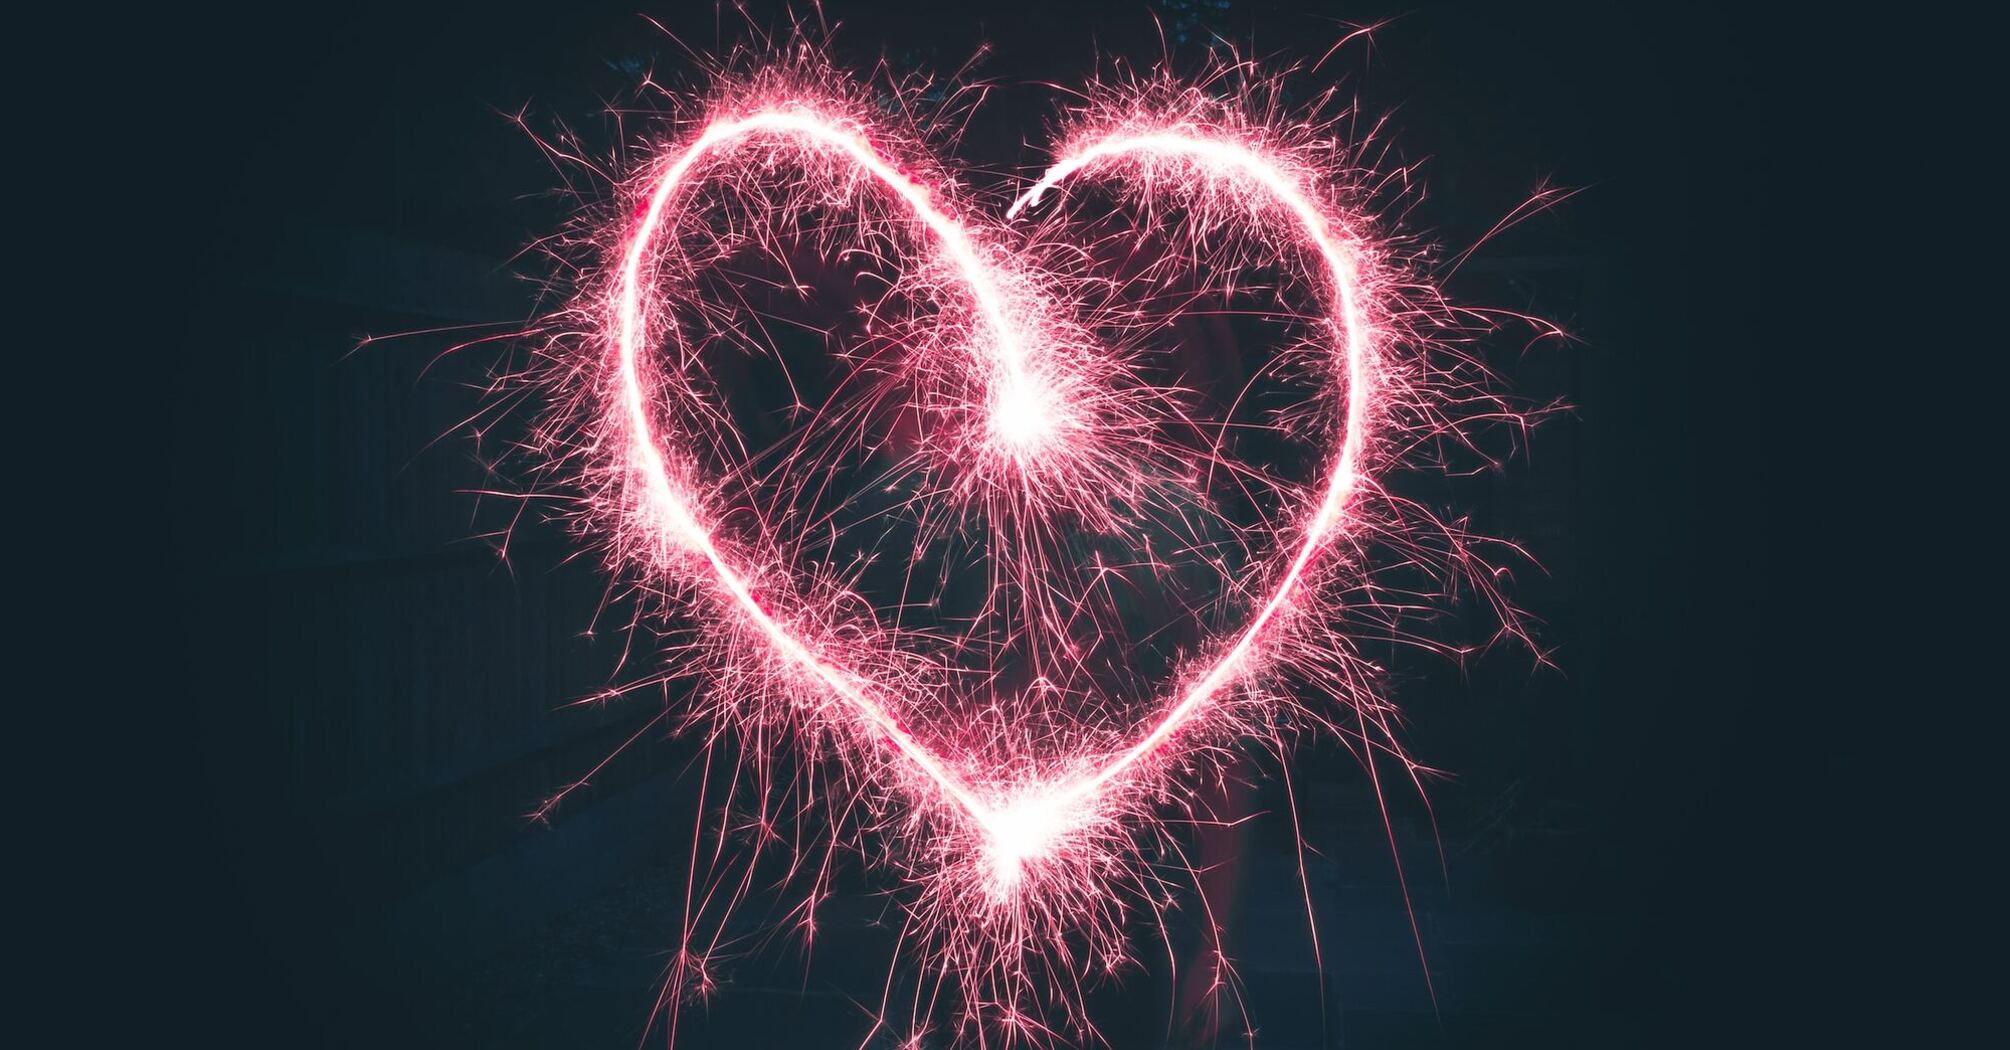 A heart shape created in Valentine's Day with pink sparklers against a dark background 